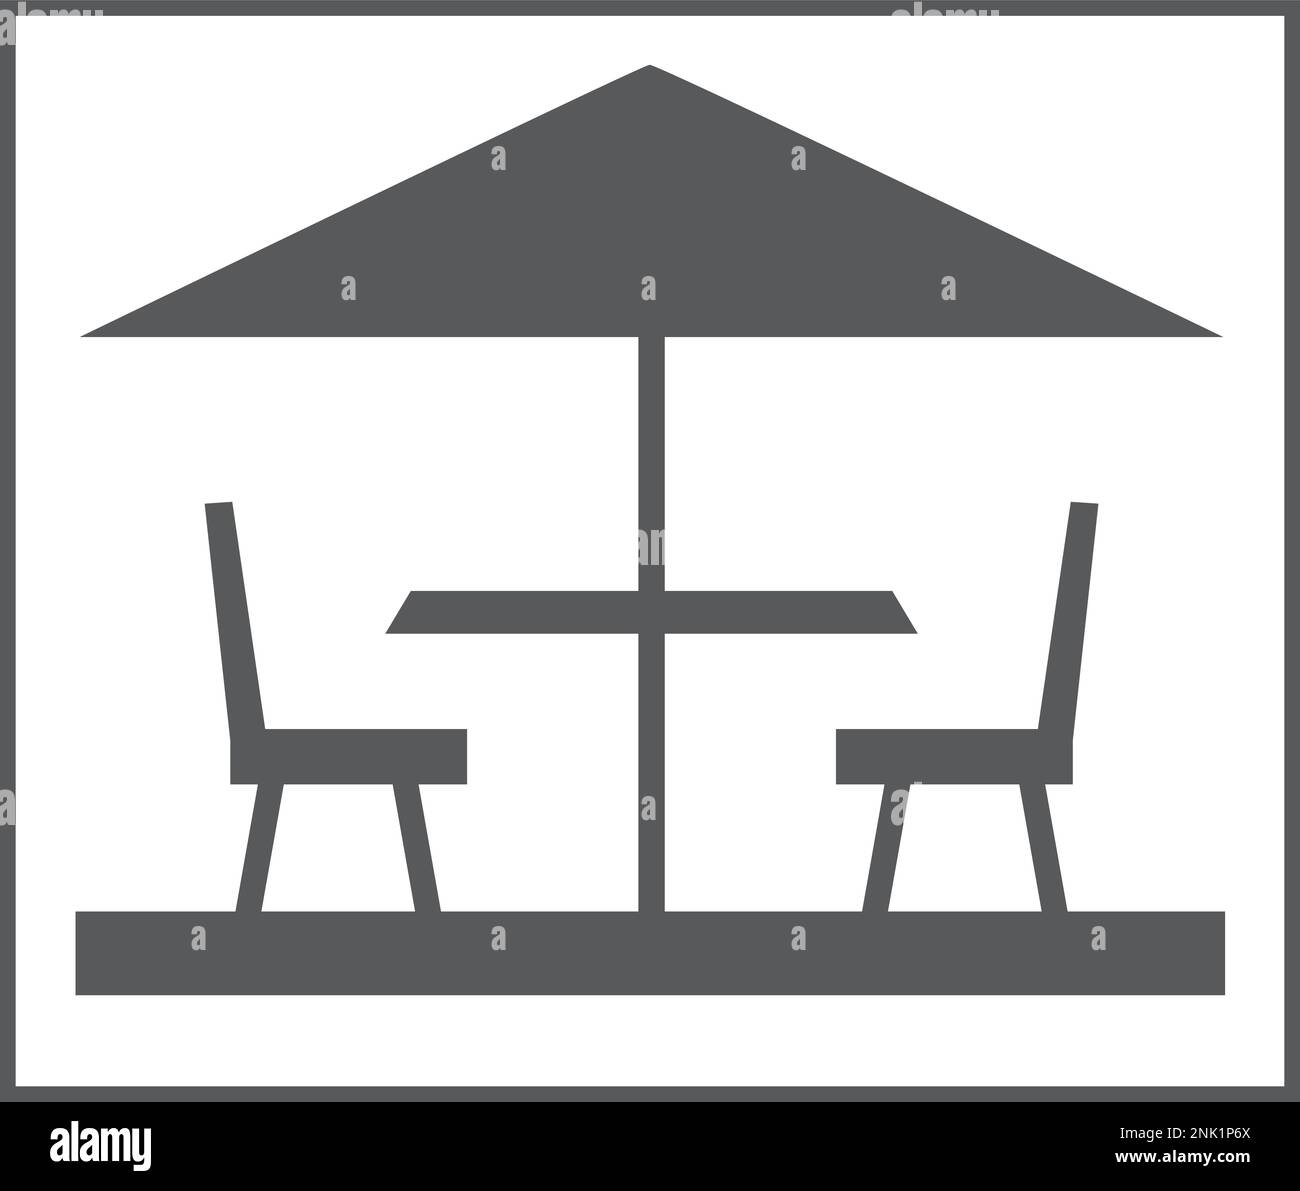 Pictogram of a sun terrace with parasol, table and chairs Stock Vector